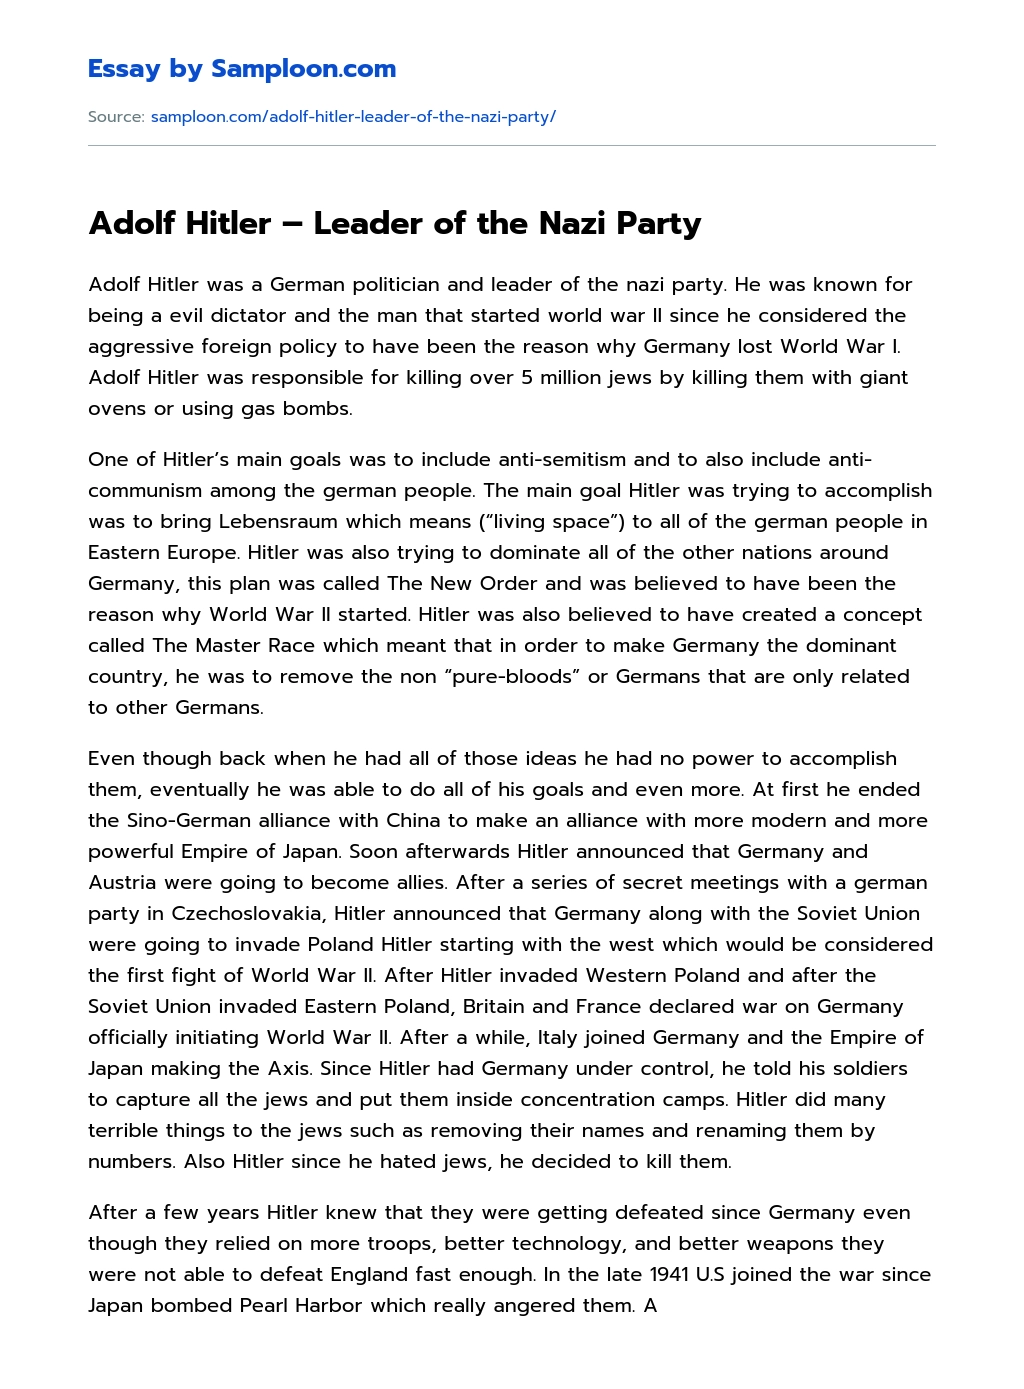 Adolf Hitler – Leader of the Nazi Party essay